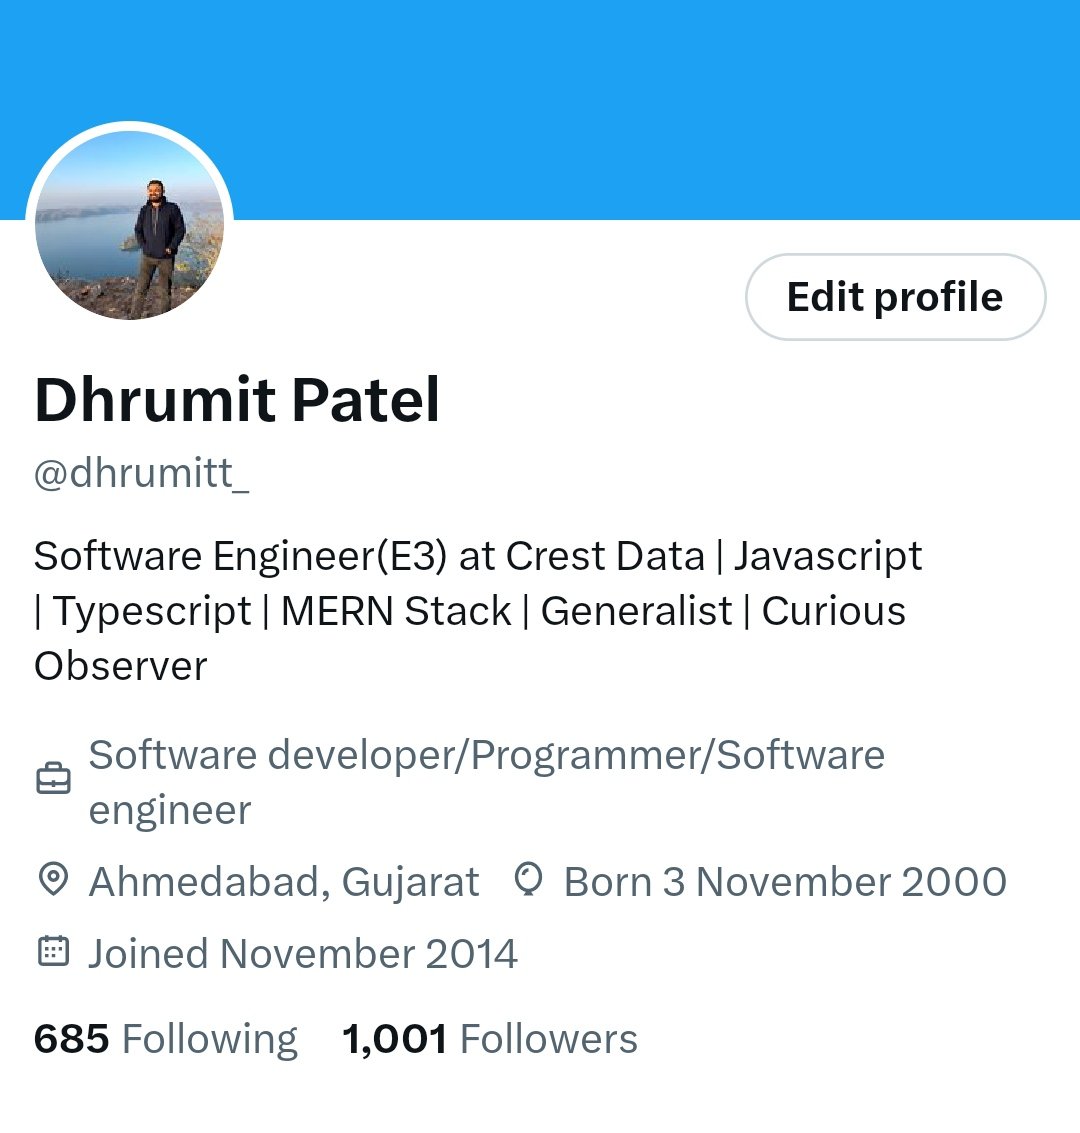 We are community of 1000 like minded people!

Thank you all

looking to #Connect with more people who are interested in

🌐Web Development 
🎨FrontEnd  
🚨Backend
🤖AI ML
🦏 Javascript 
✅ Development
🏗️ Building online
🚀UI/UX
📂Open Source
💼 Freelancing

#letsconnect #copied